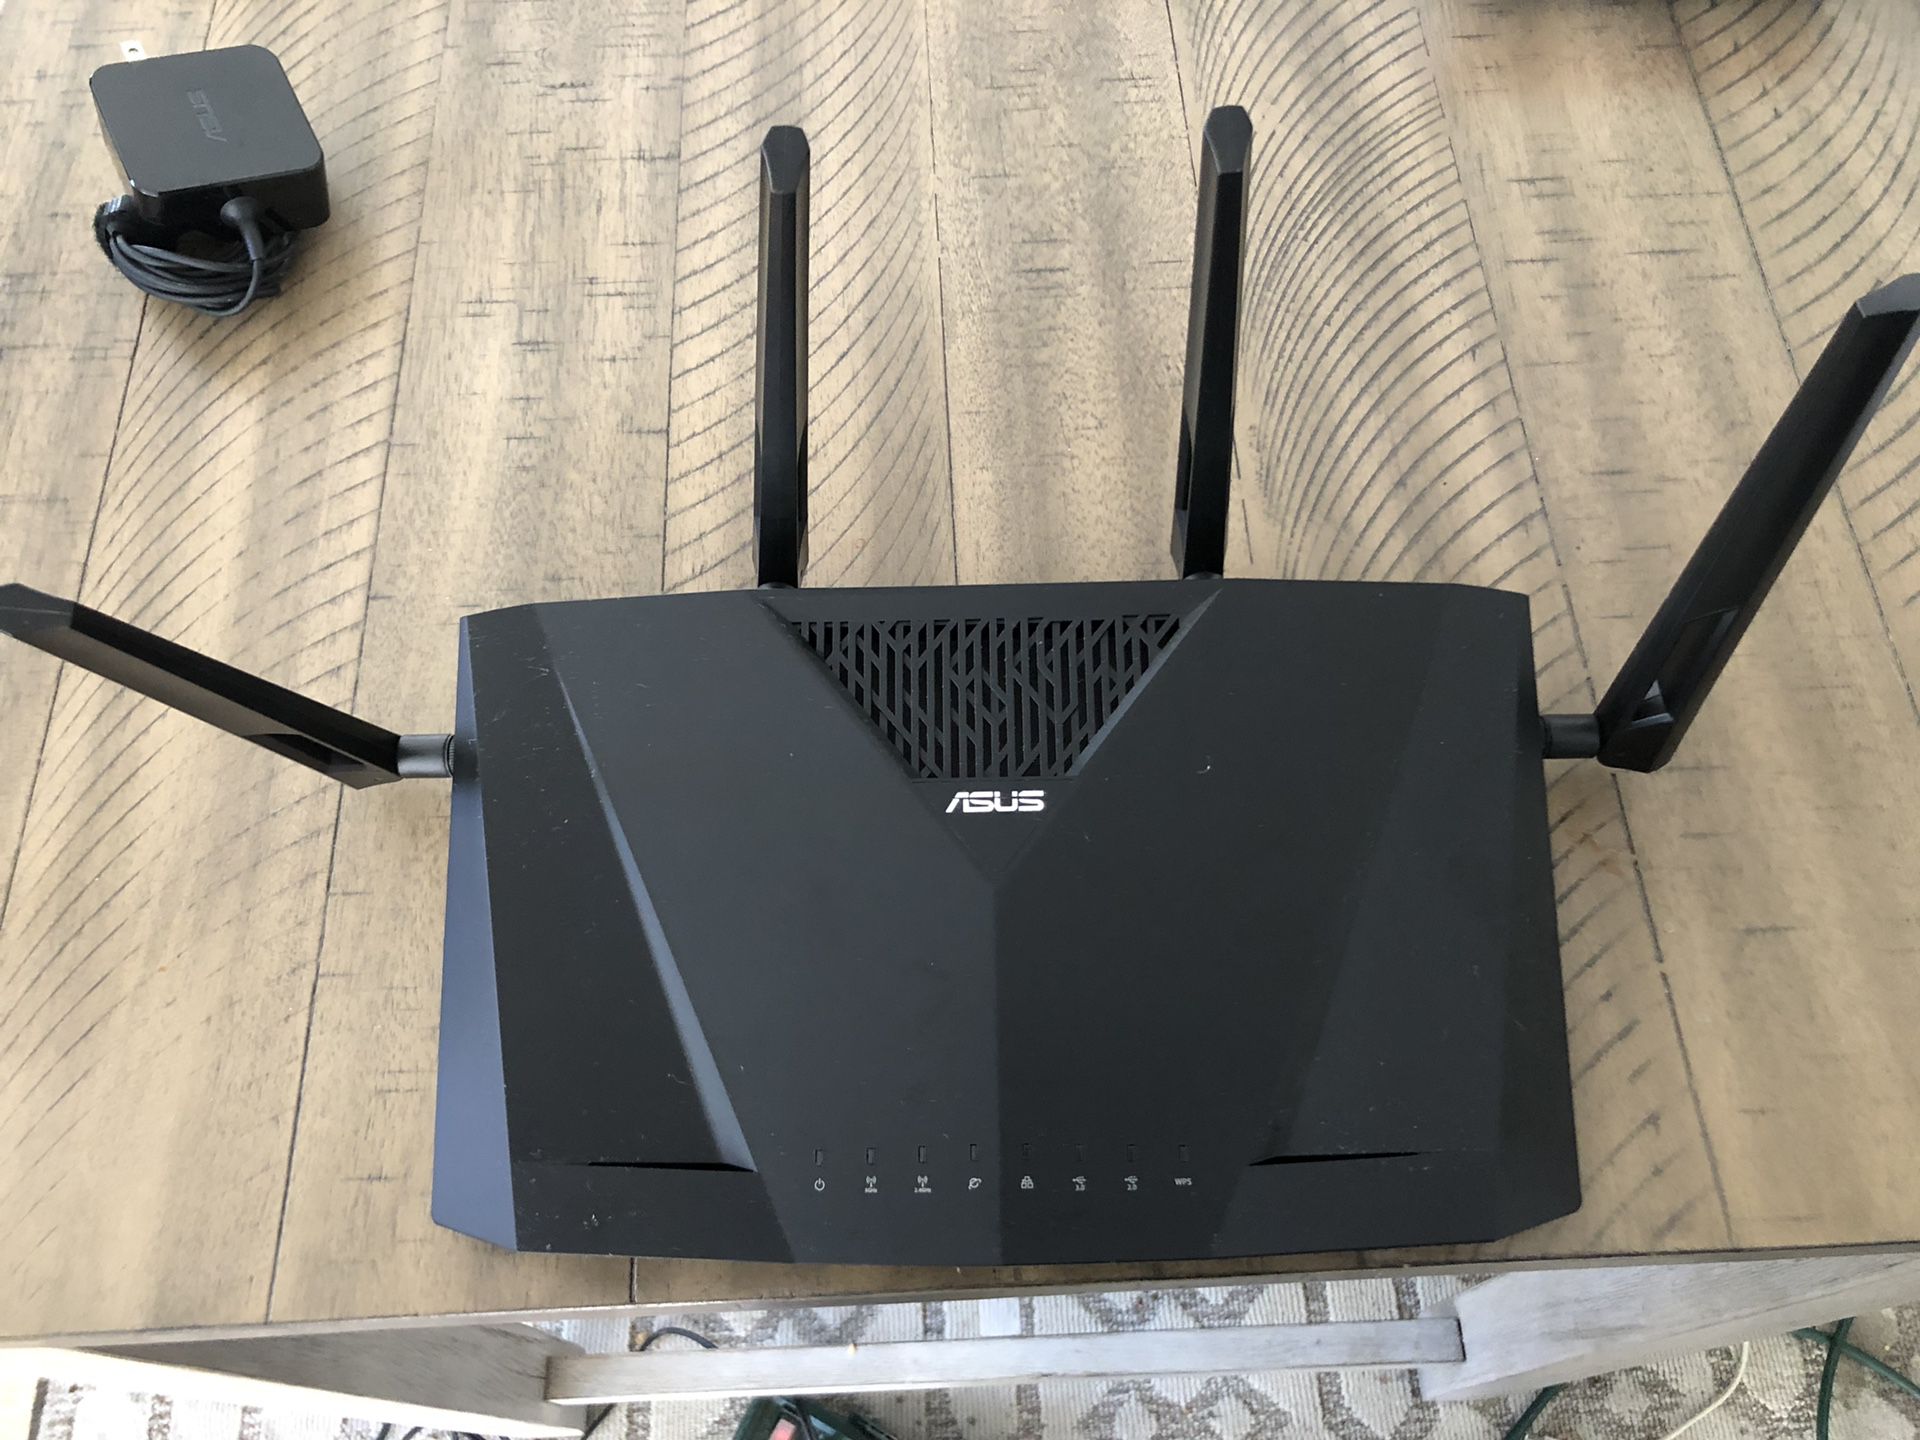 ASUS ROG Wireless router AC3100